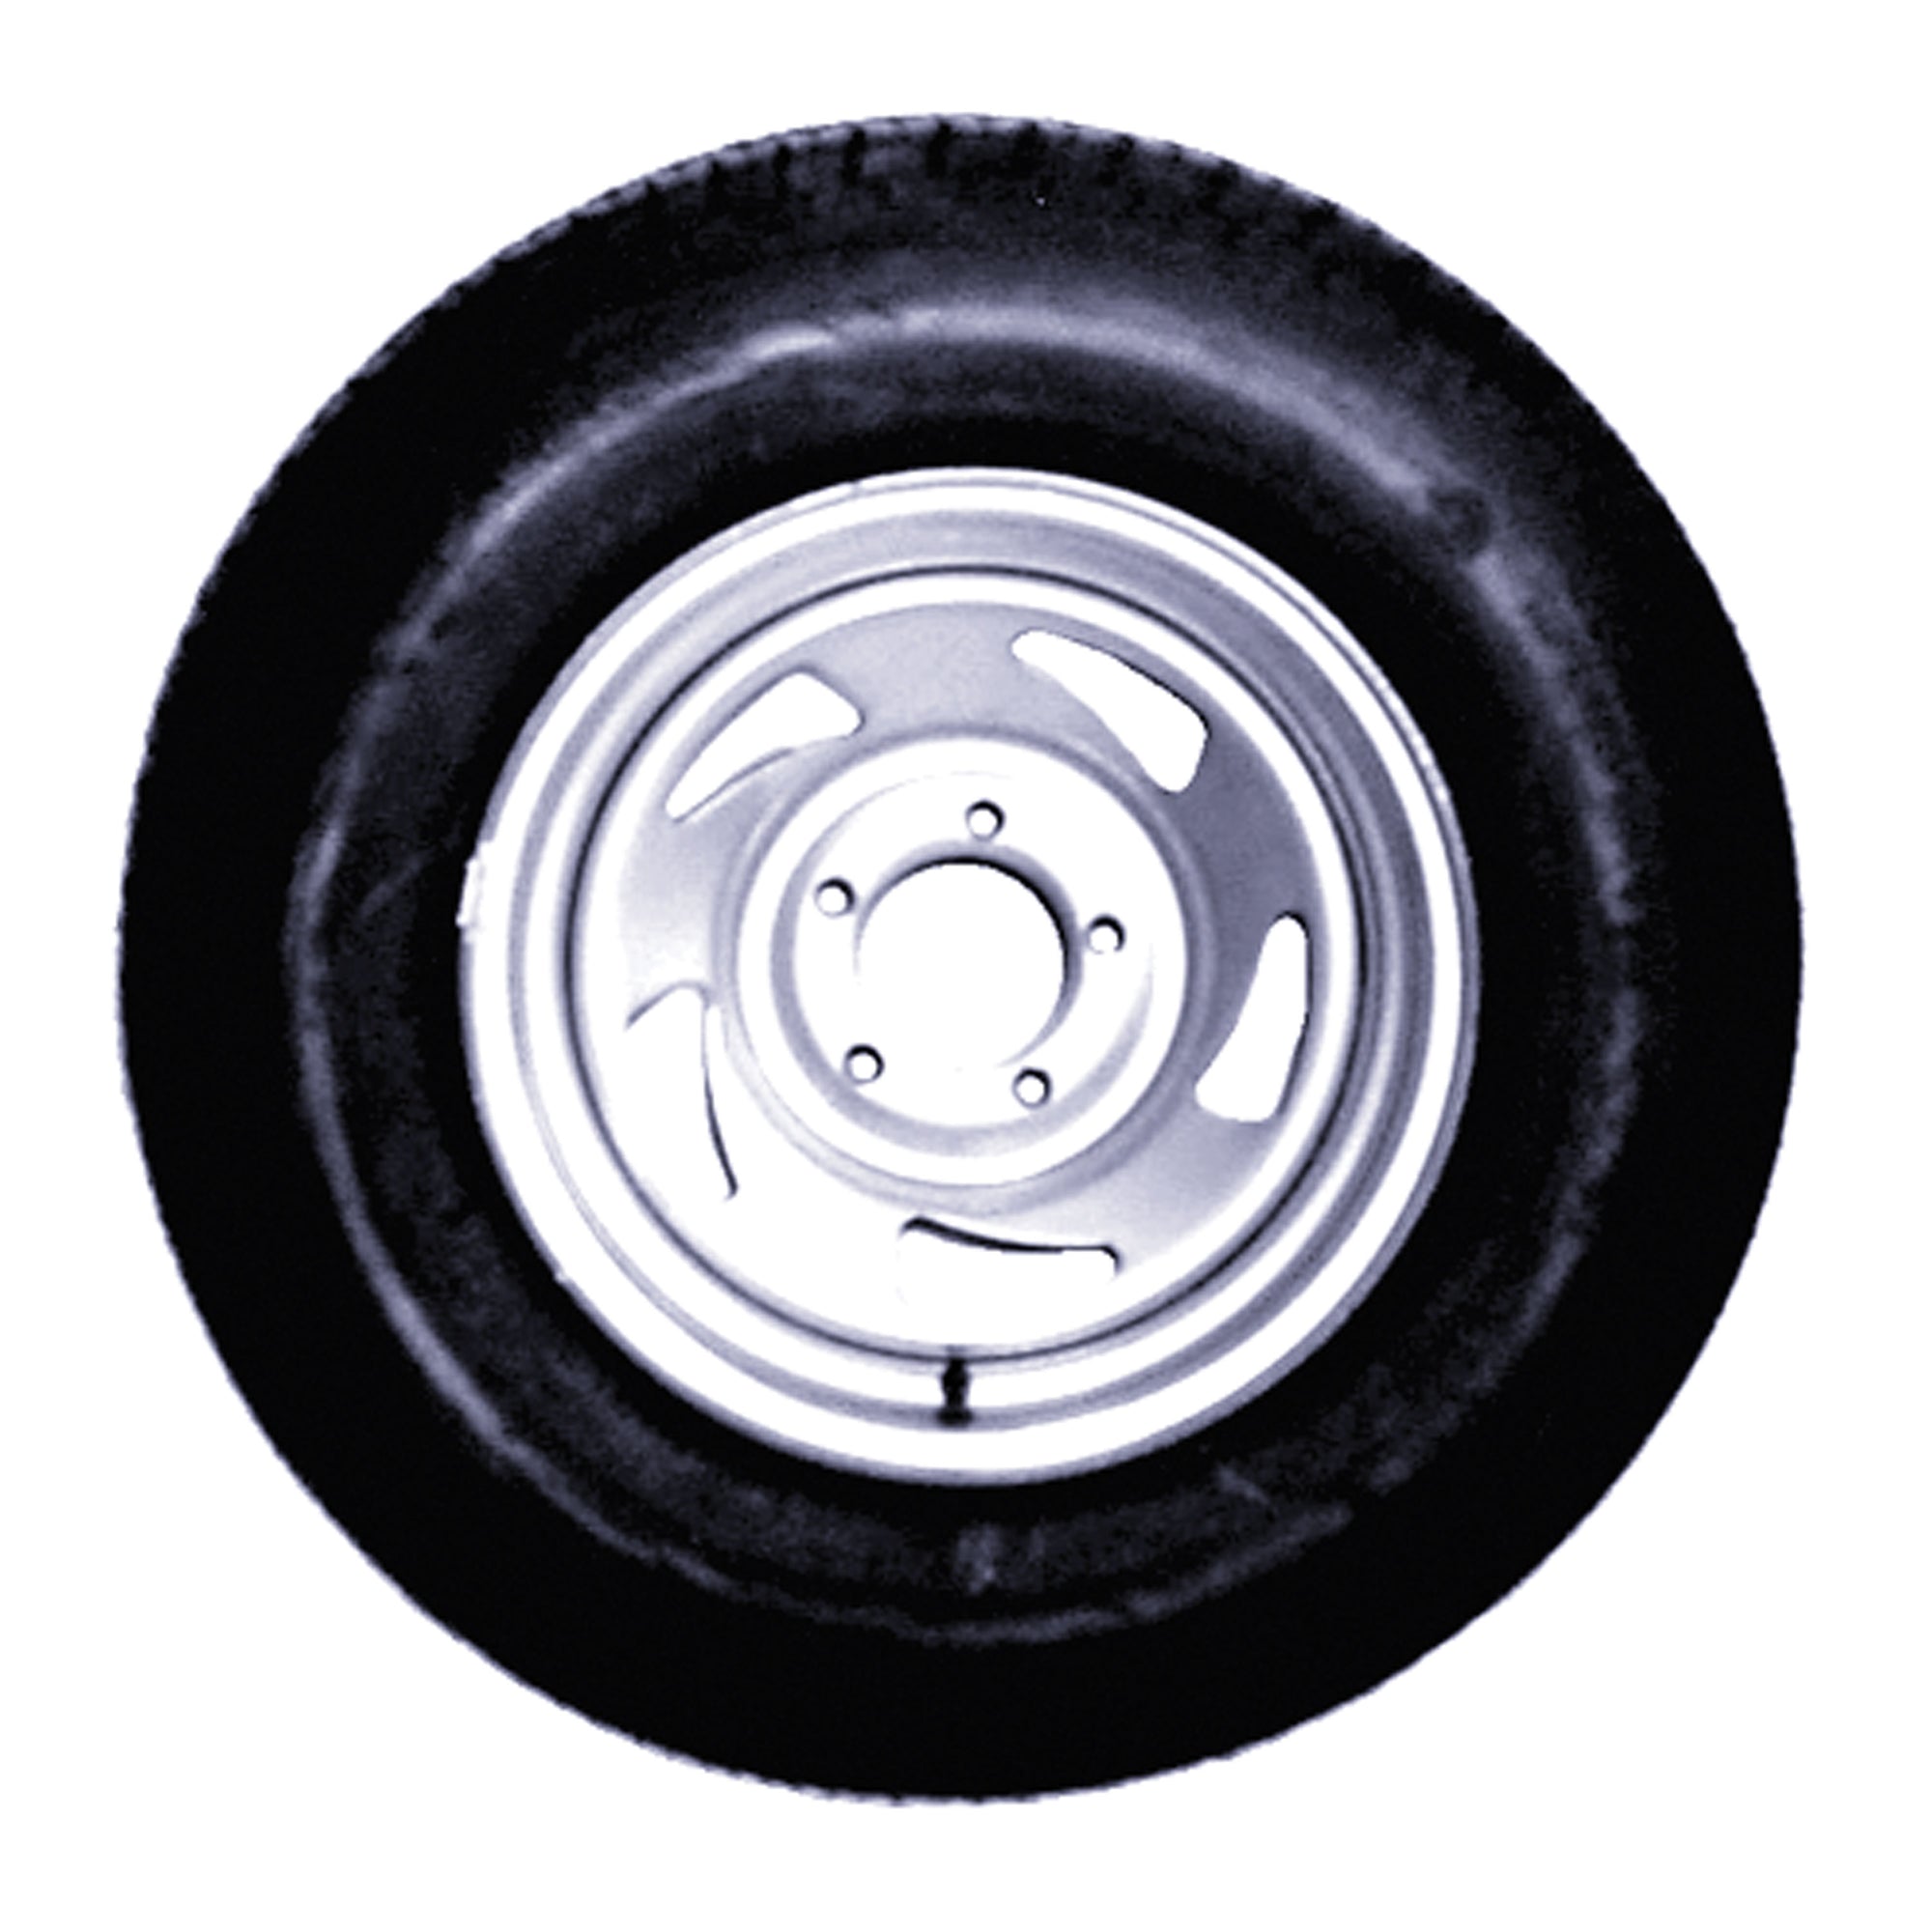 Americana Tire and Wheel 32115 Economy Radial Tire and Wheel ST205/75R14 C/5-Hole - Morton Silver Directional Rim